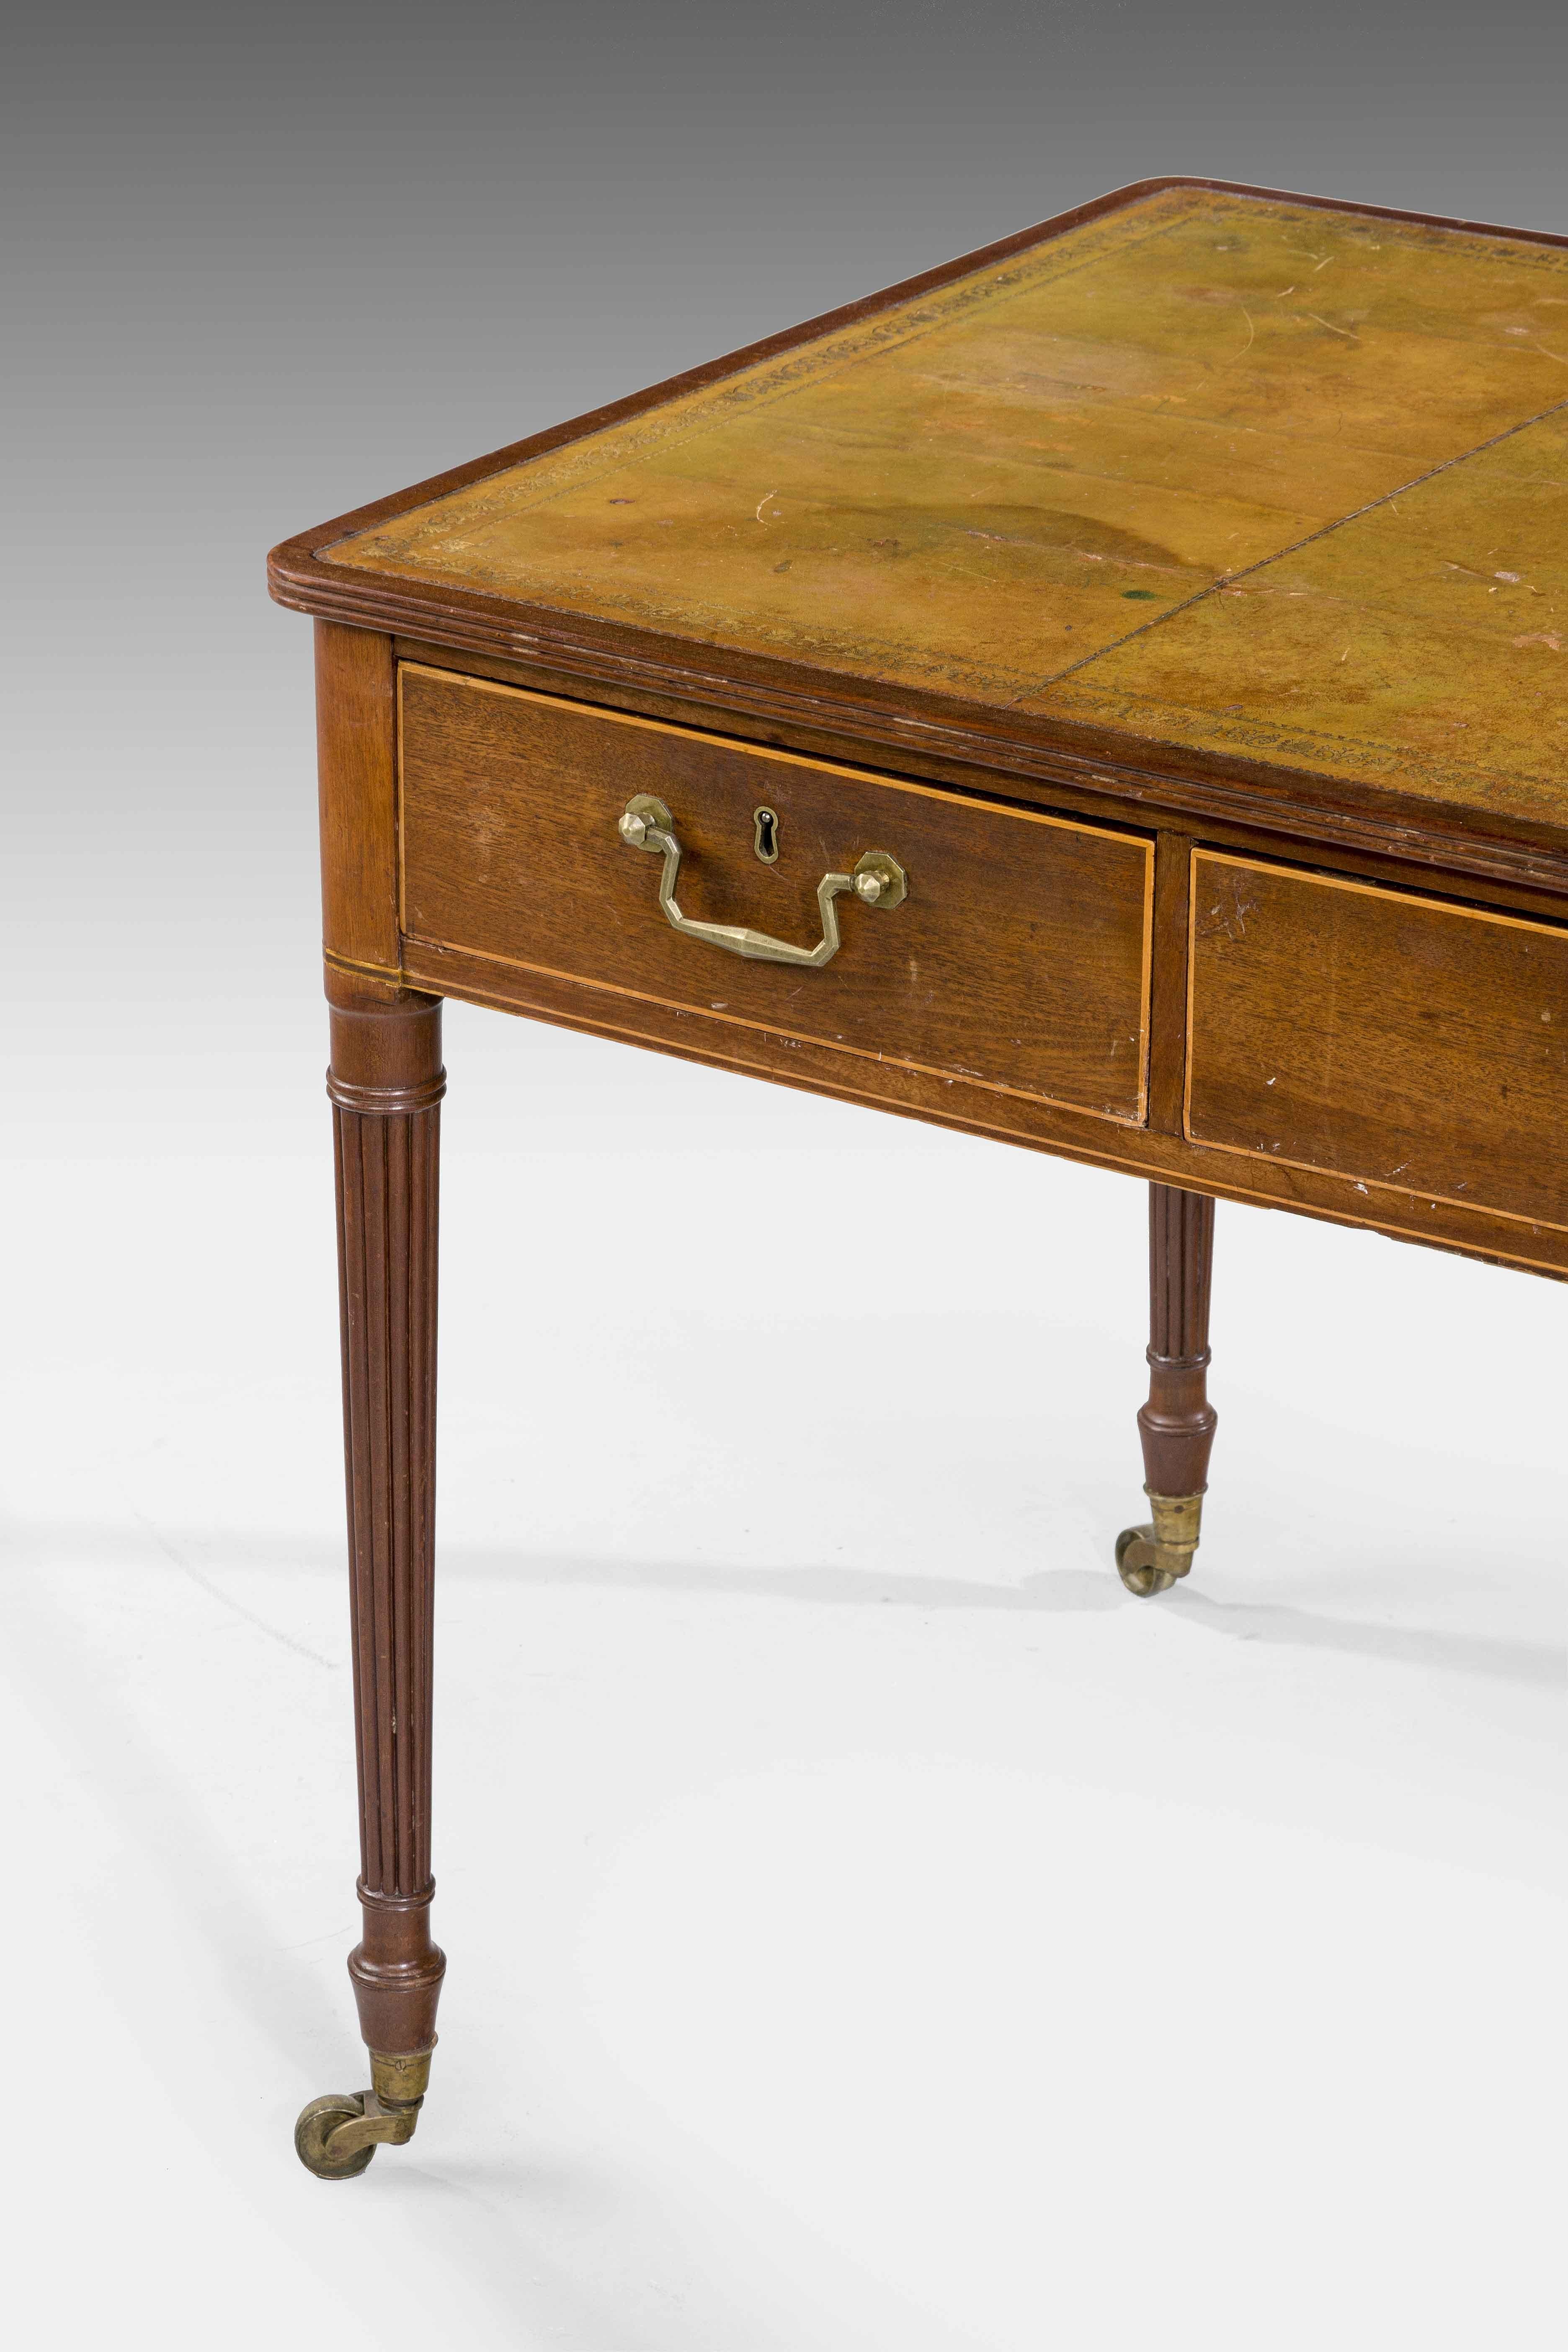 A good George III period mahogany writing table, the front with three oak lined drawers, the reverse with dummy drawers. Finely turned and fluted supports, inset leather top which is old and probably not original and now somewhat tired. Good square